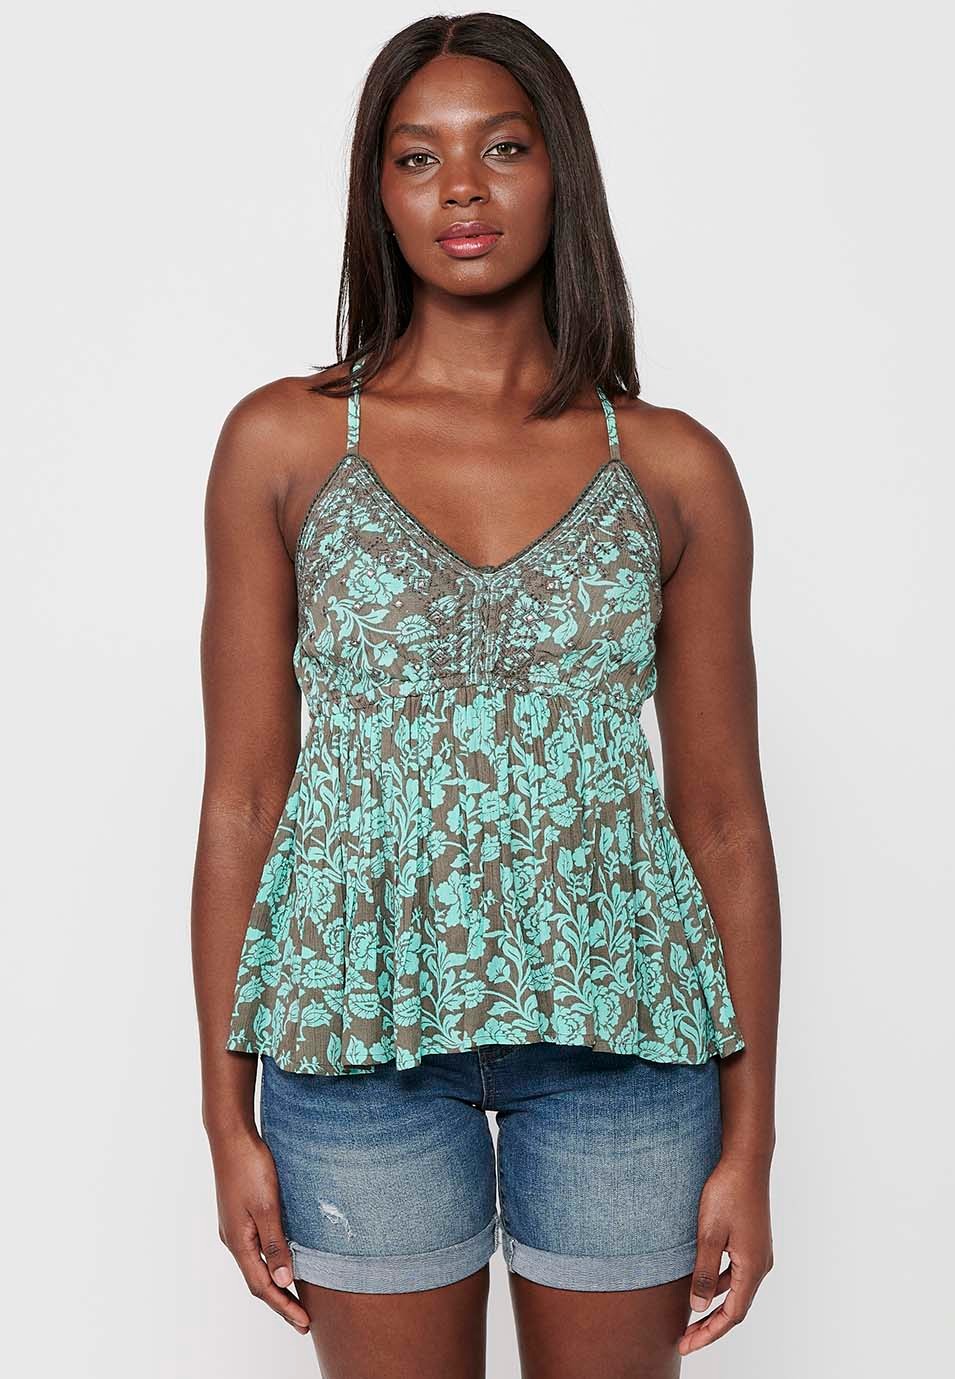 Strap Blouse with Floral Print and Turquoise Front Detail for Women 1